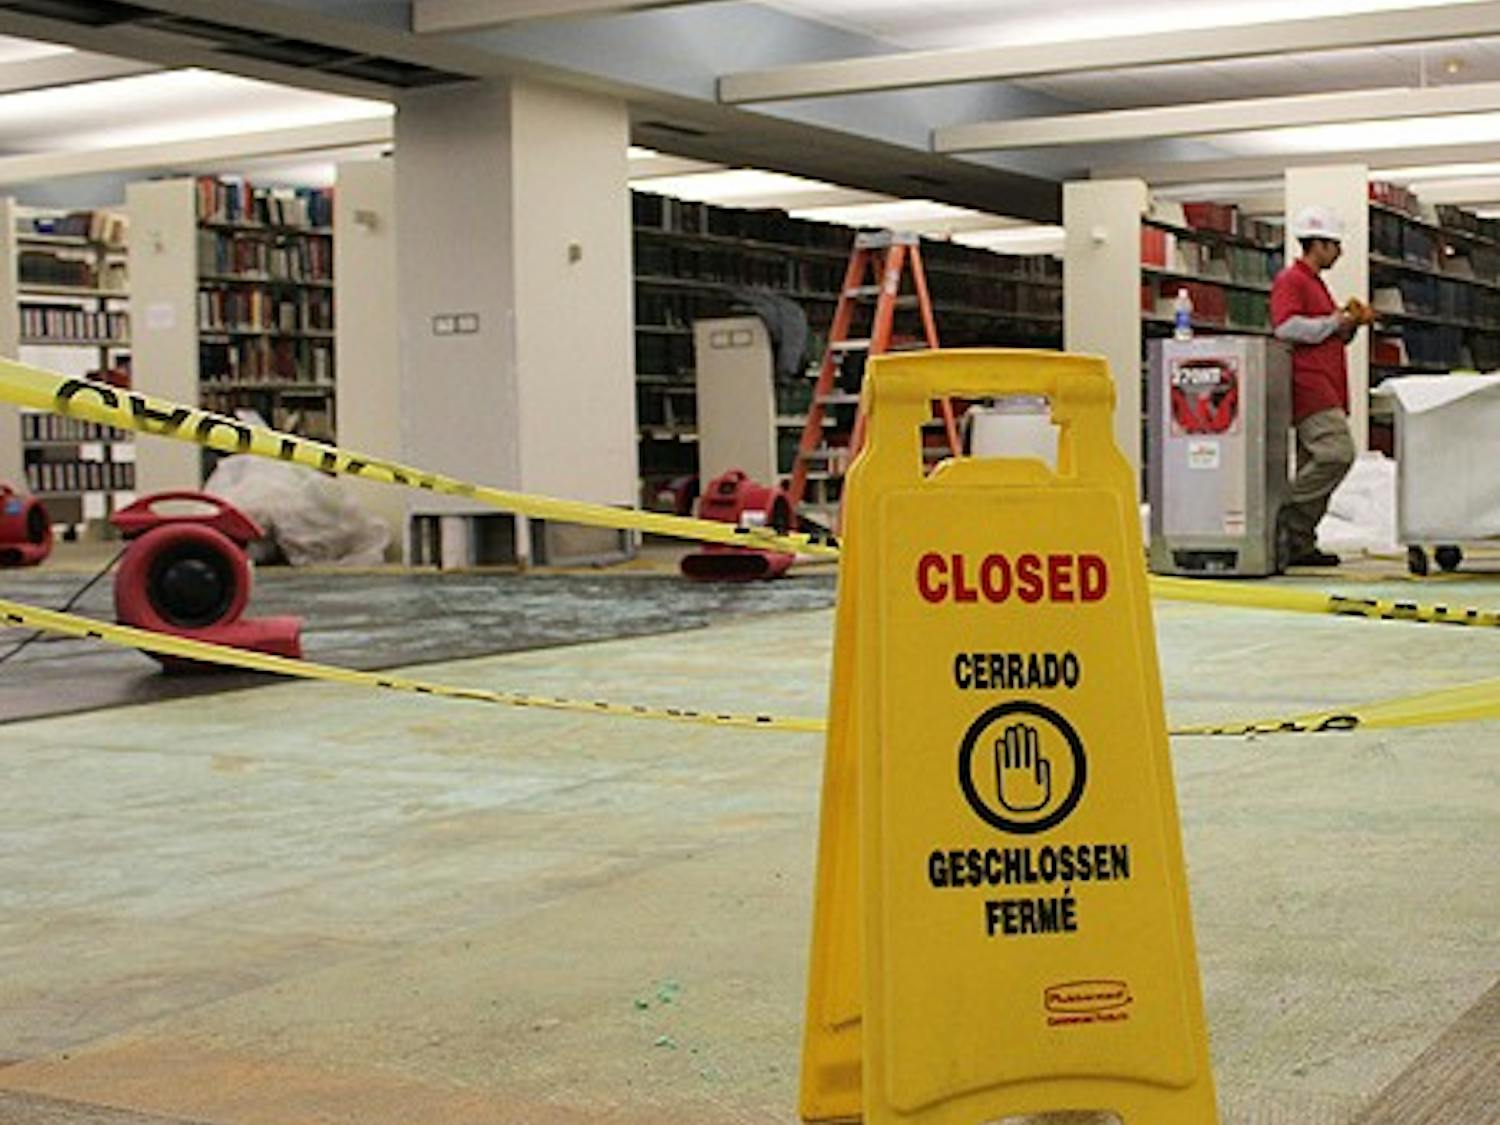 The water leak in Davis Library has caused inconvenience to students, but work to fix the damage is underway. 